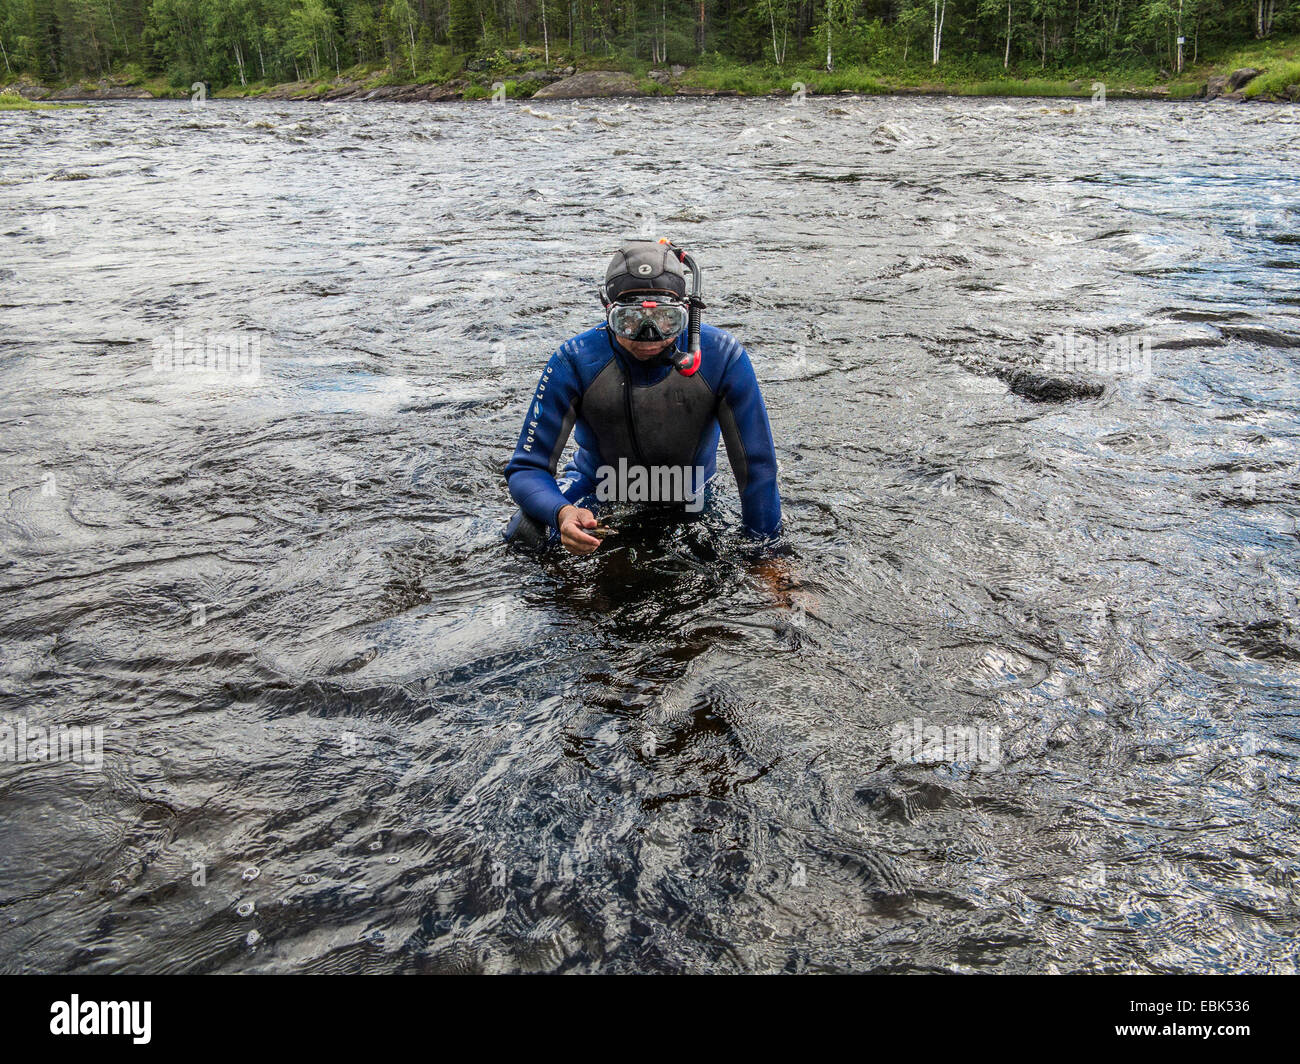 freshwater pearl mussel (Scottish pearl mussel), eastern pearlshell (Margaritifera margaritifera), diver is leaving a river with an exemplar in the hand, Russia, Karelien, Keret river Stock Photo